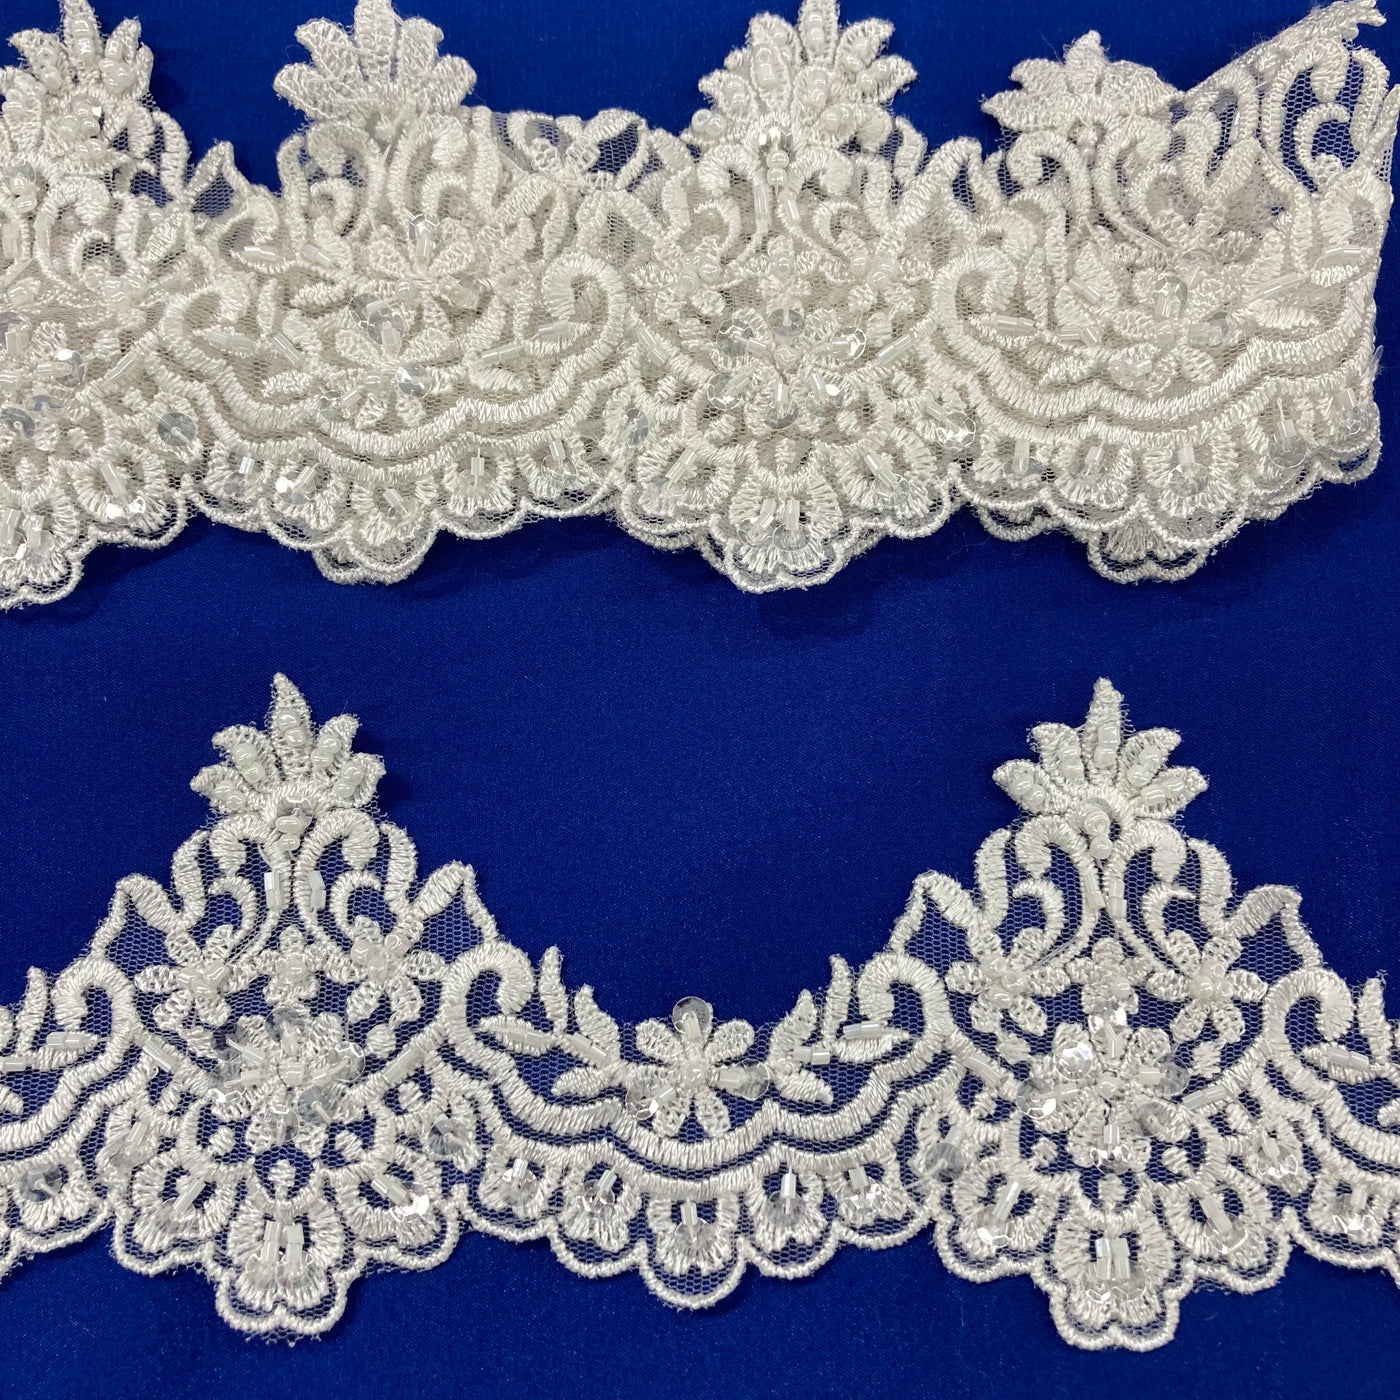 Beaded Lace Trimming Embroidered on 100% Polyester Net Mesh | Lace USA - 21926W/1-BP